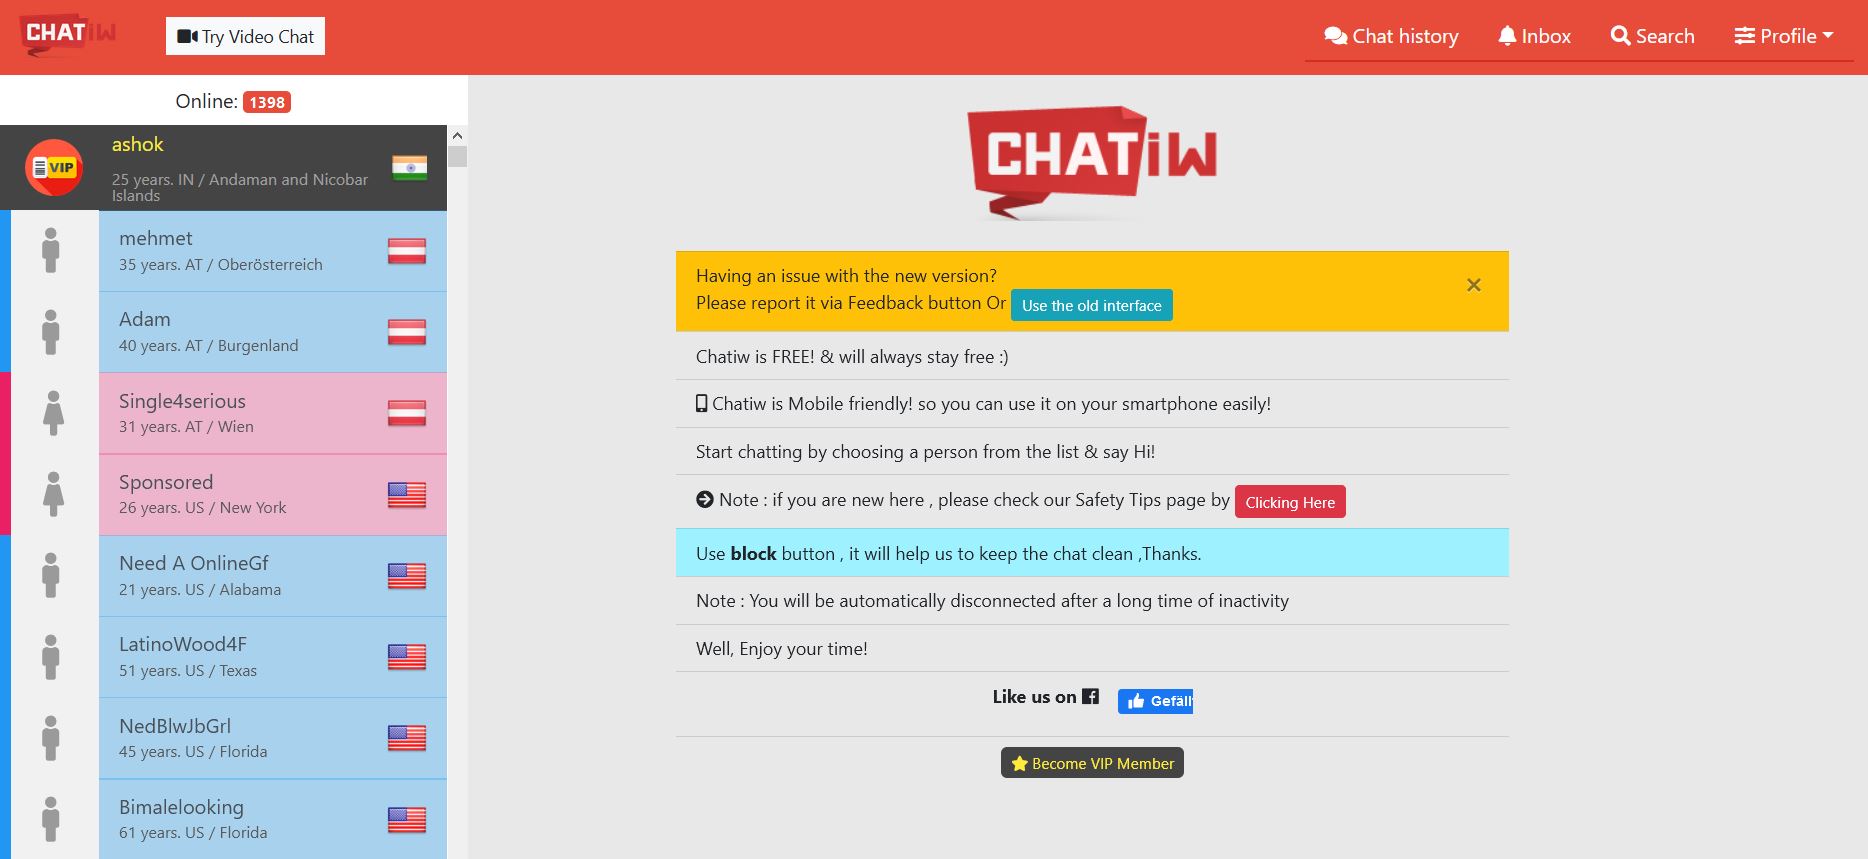 Online chat #1 Chatiw